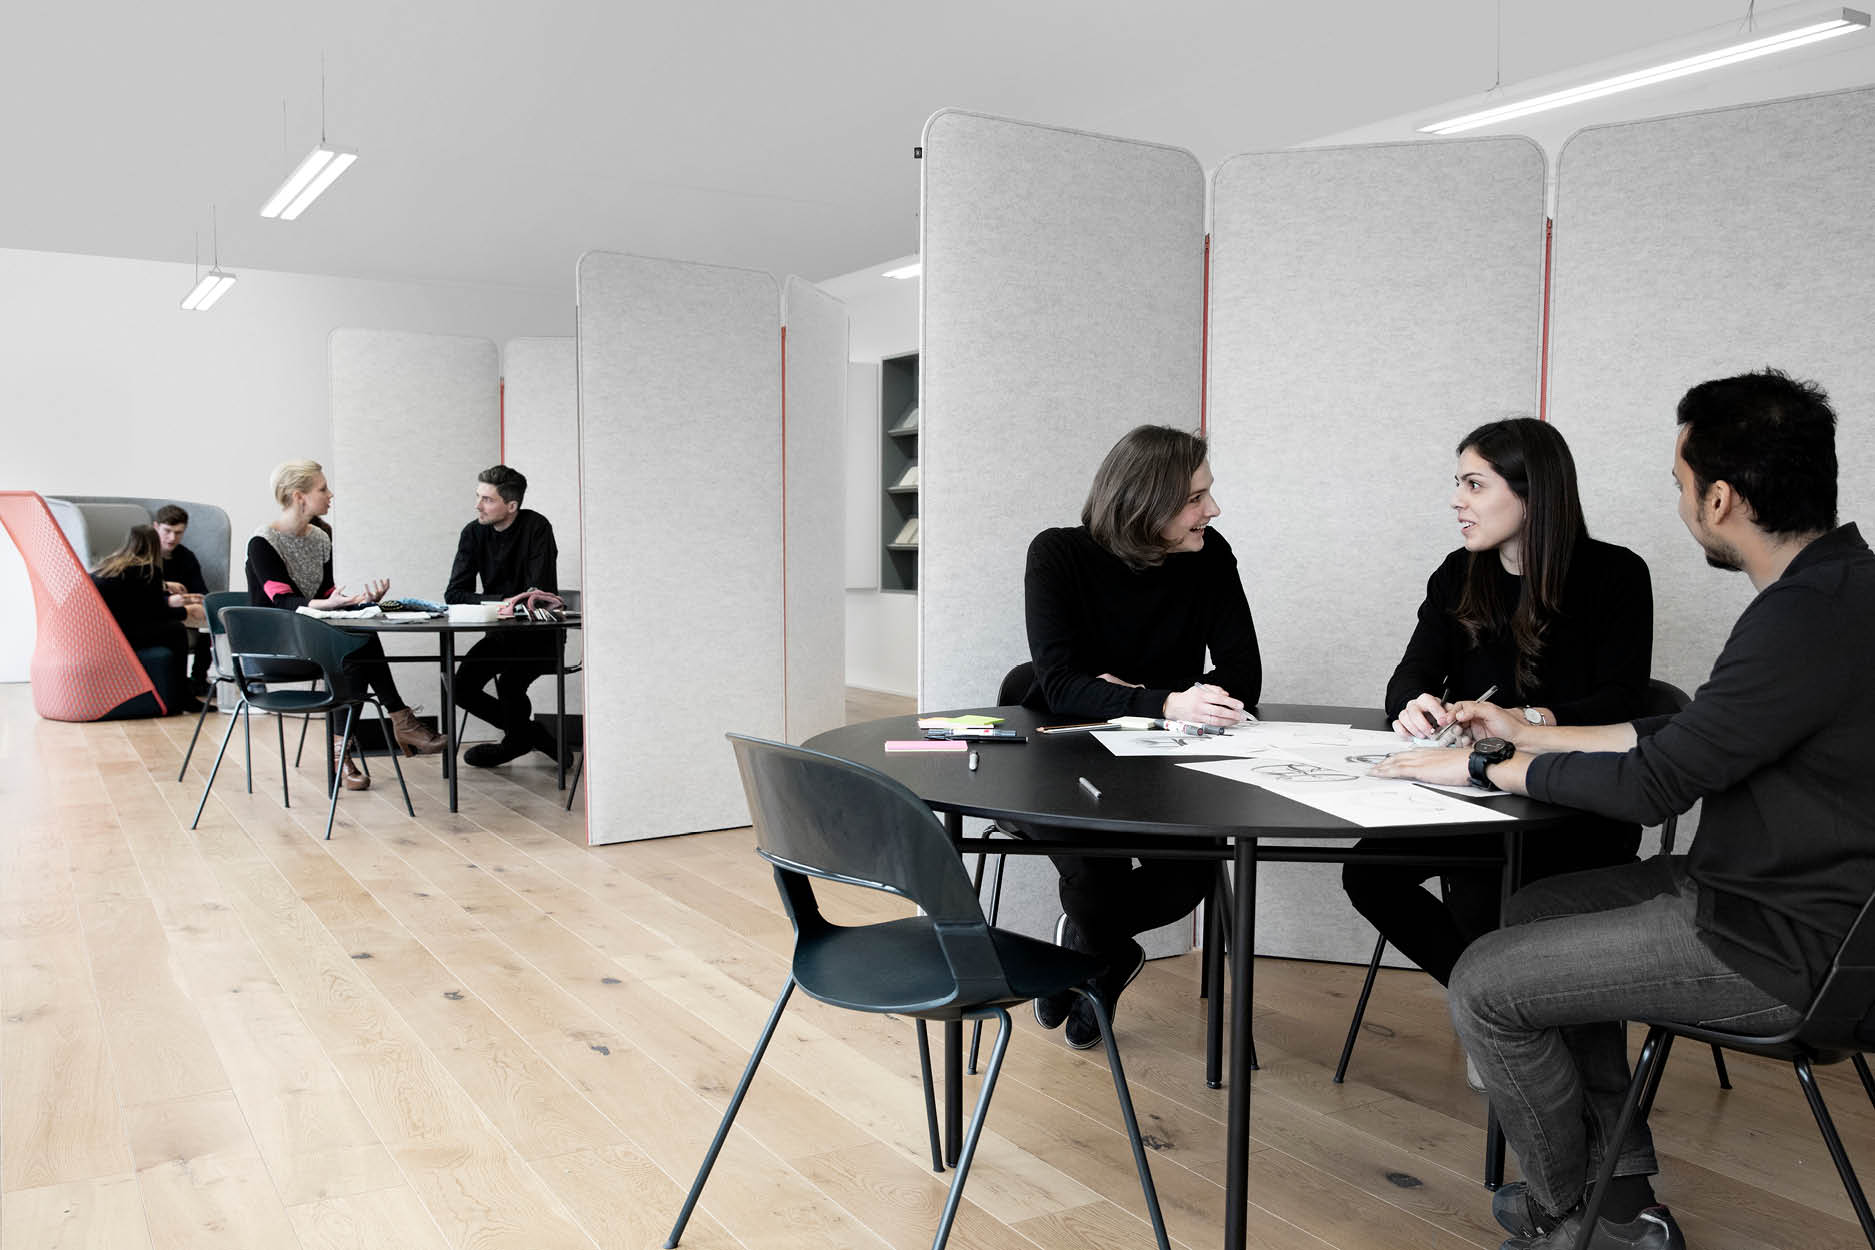 The open space is perfect for creatives to collaborate and share ideas